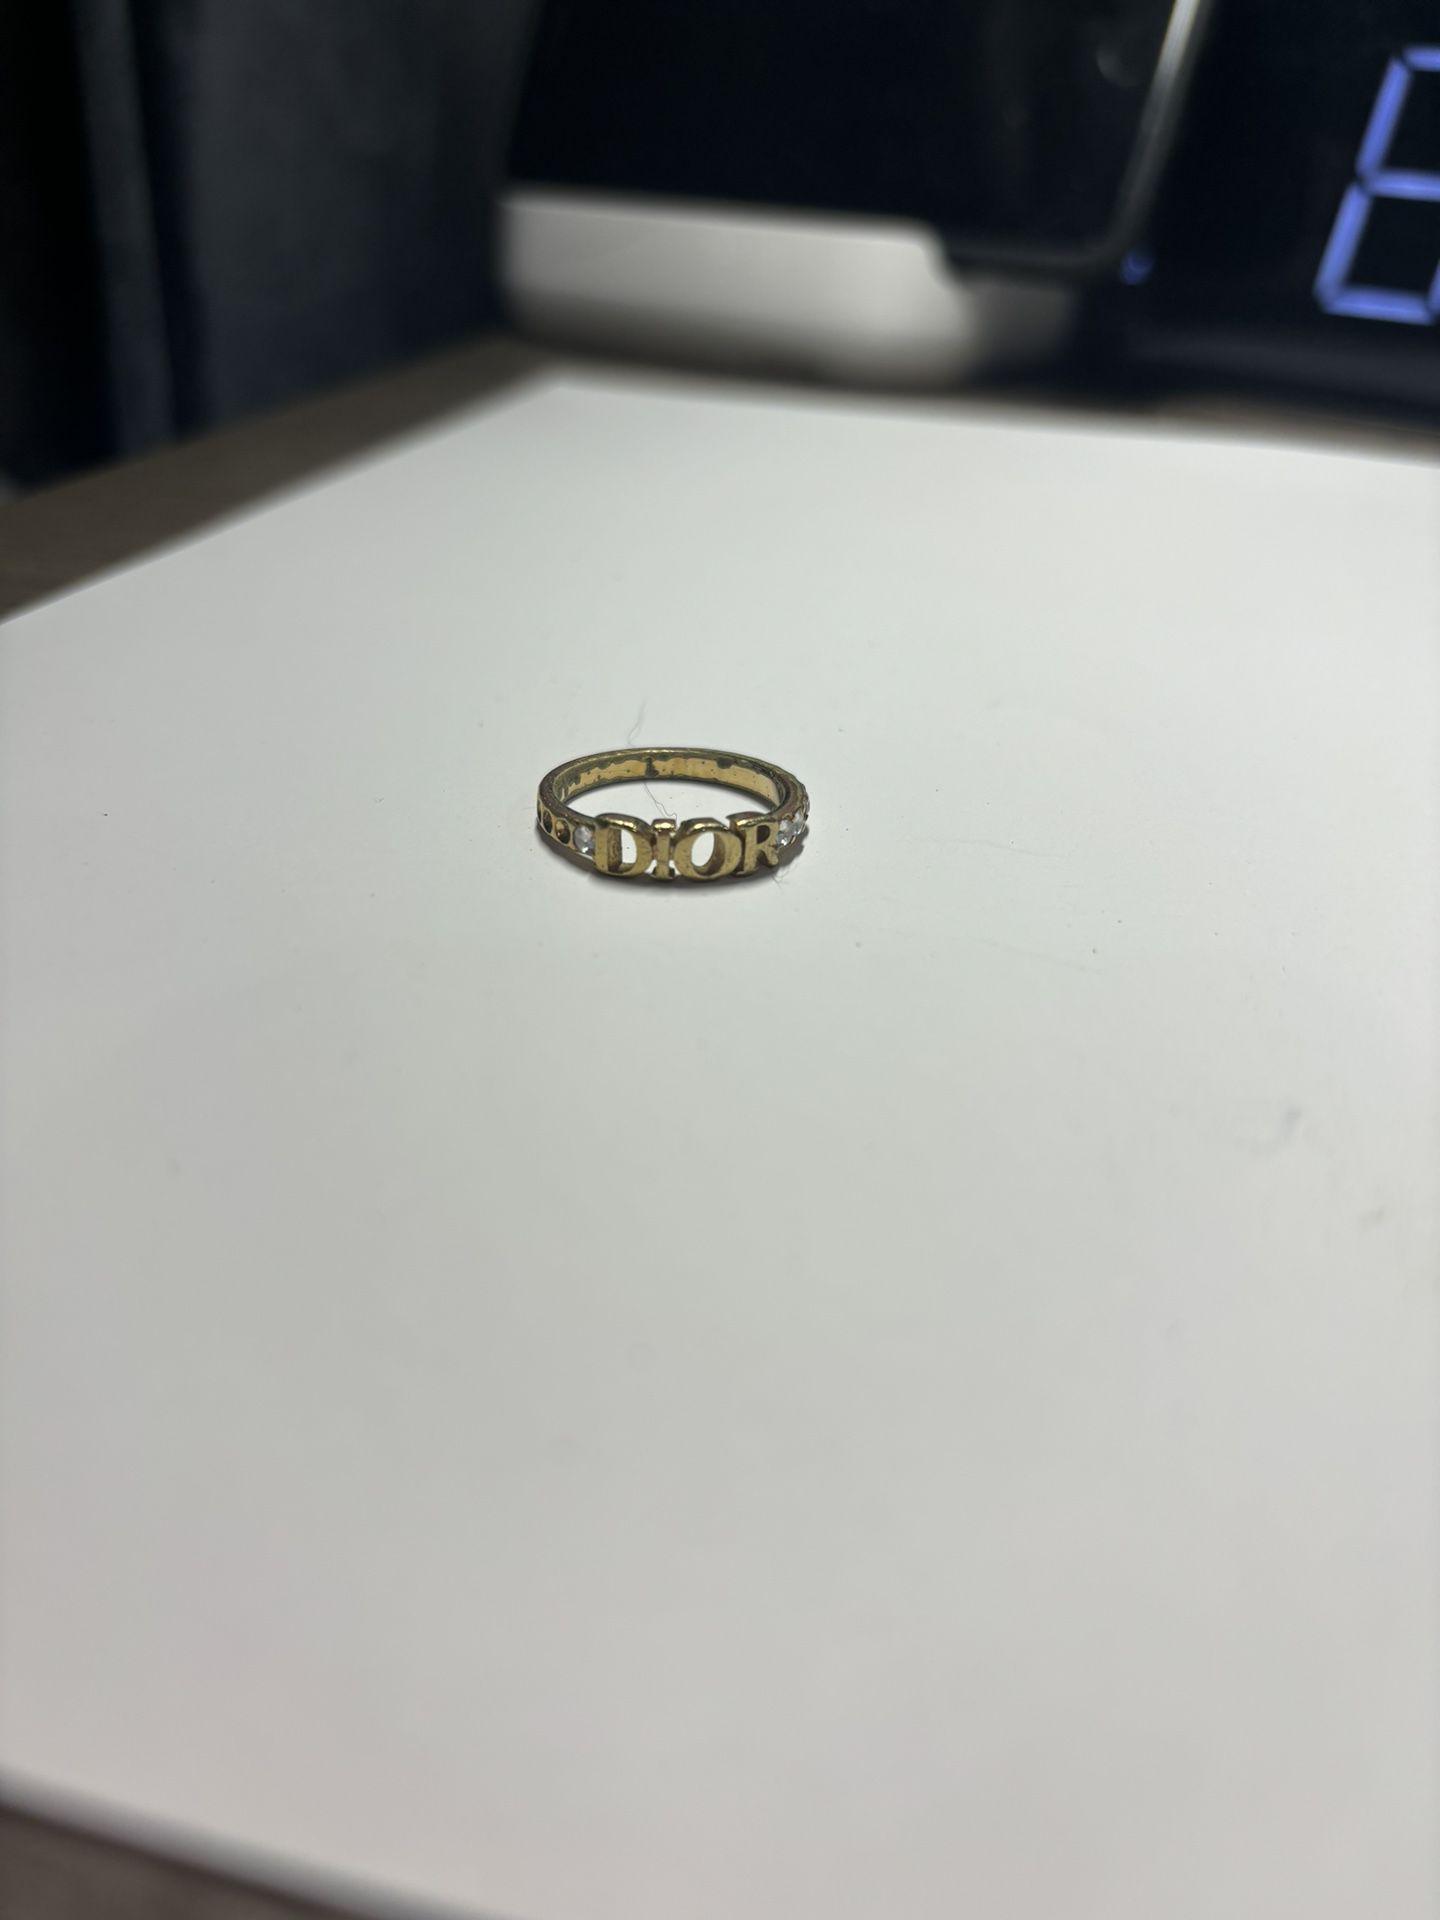 Dior Ring Size 7